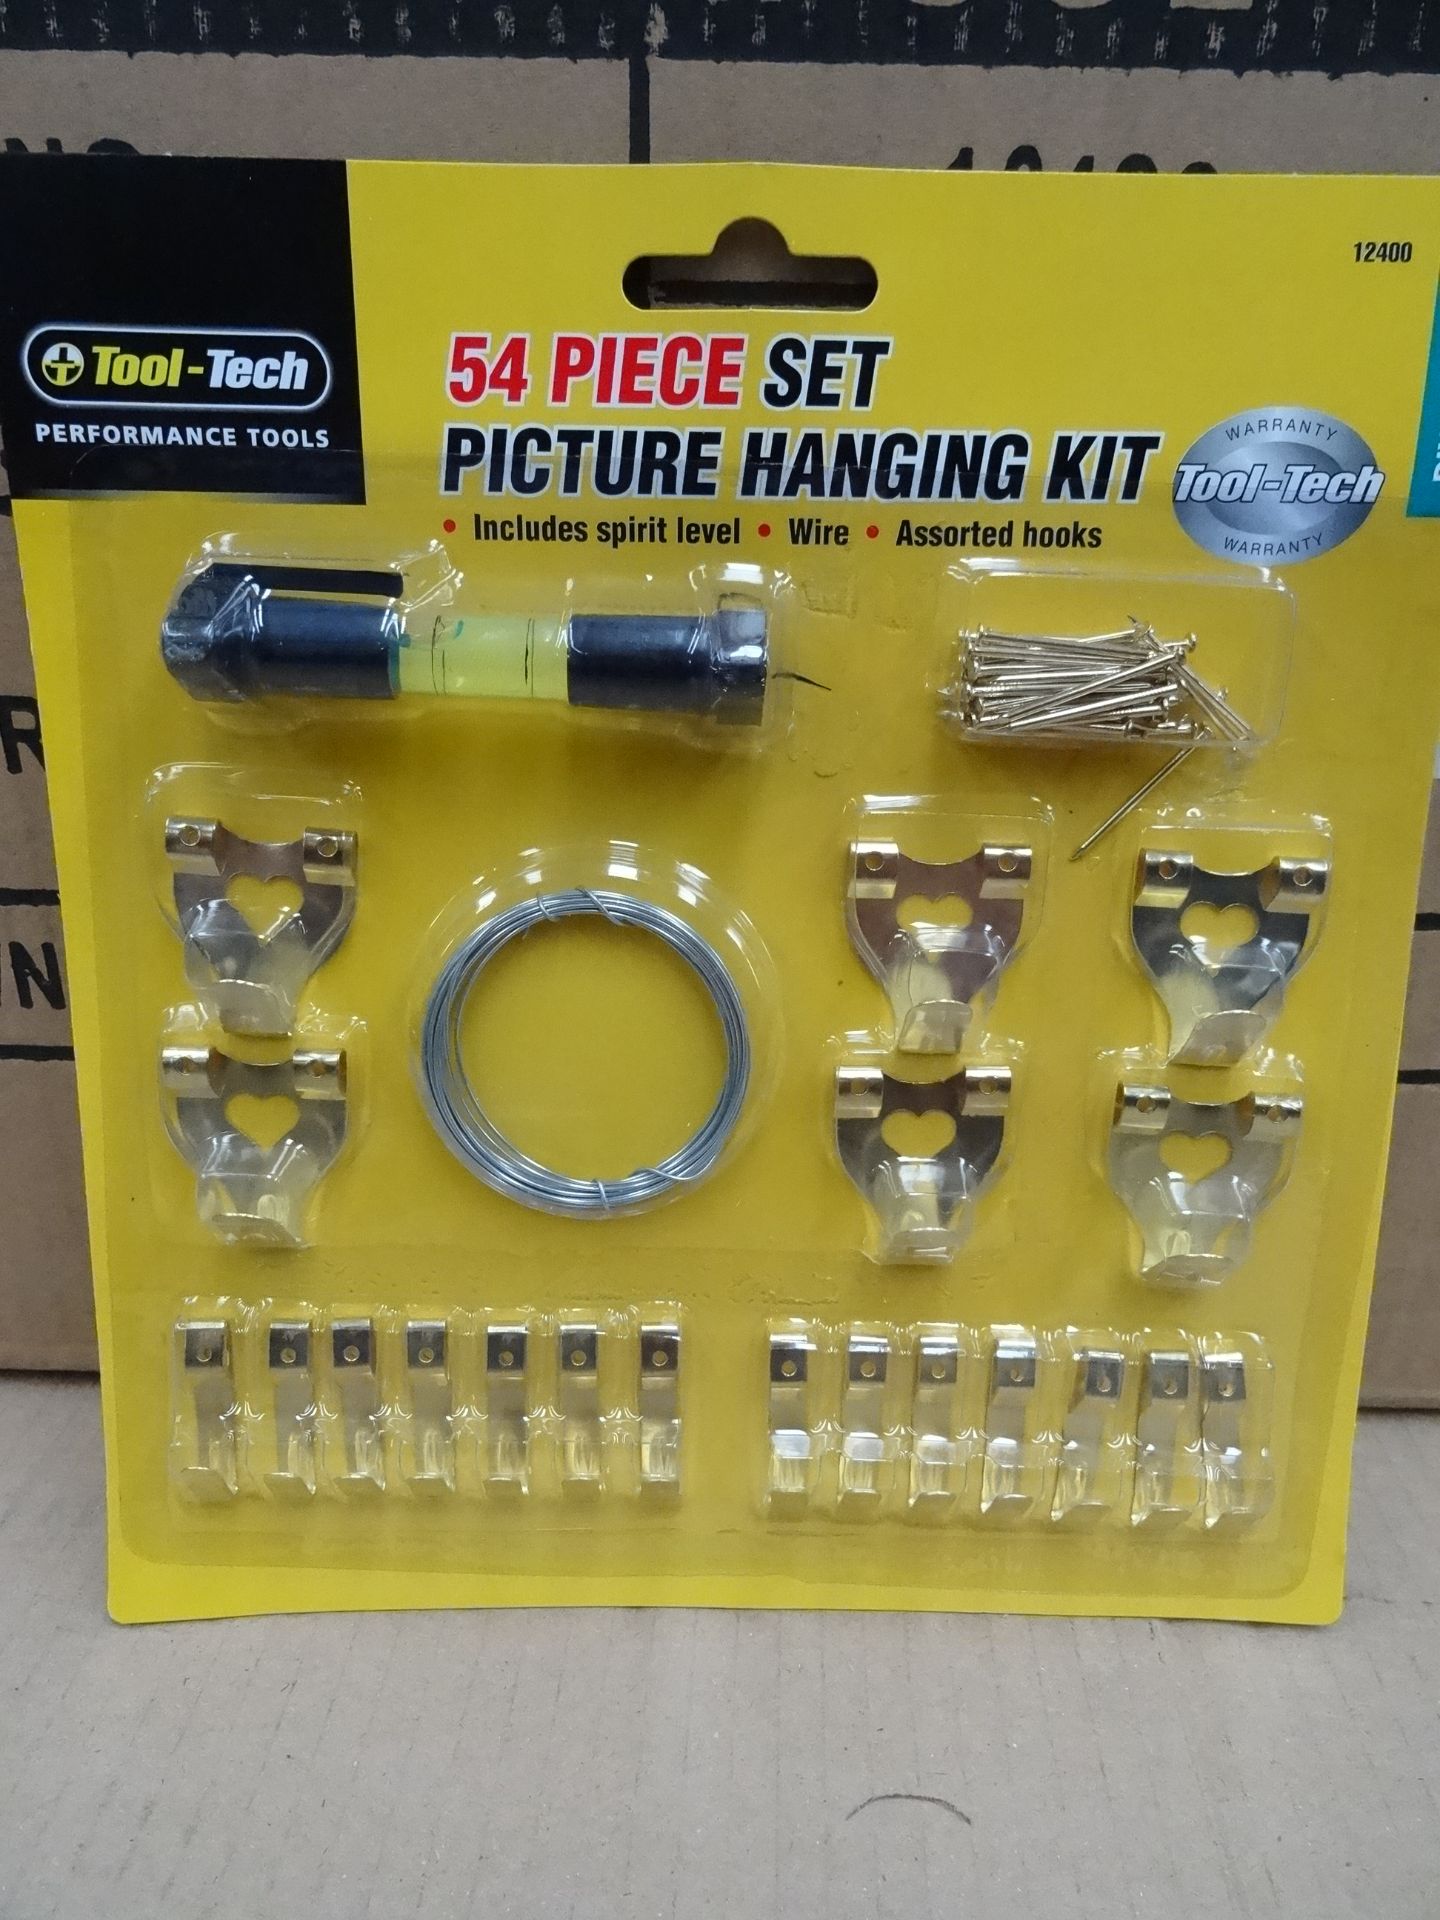 24 x Tool Tech 54 Piece Picture Hanging Kits. Includes Spirit Level, Wire and Assd. Hooks. Brand new